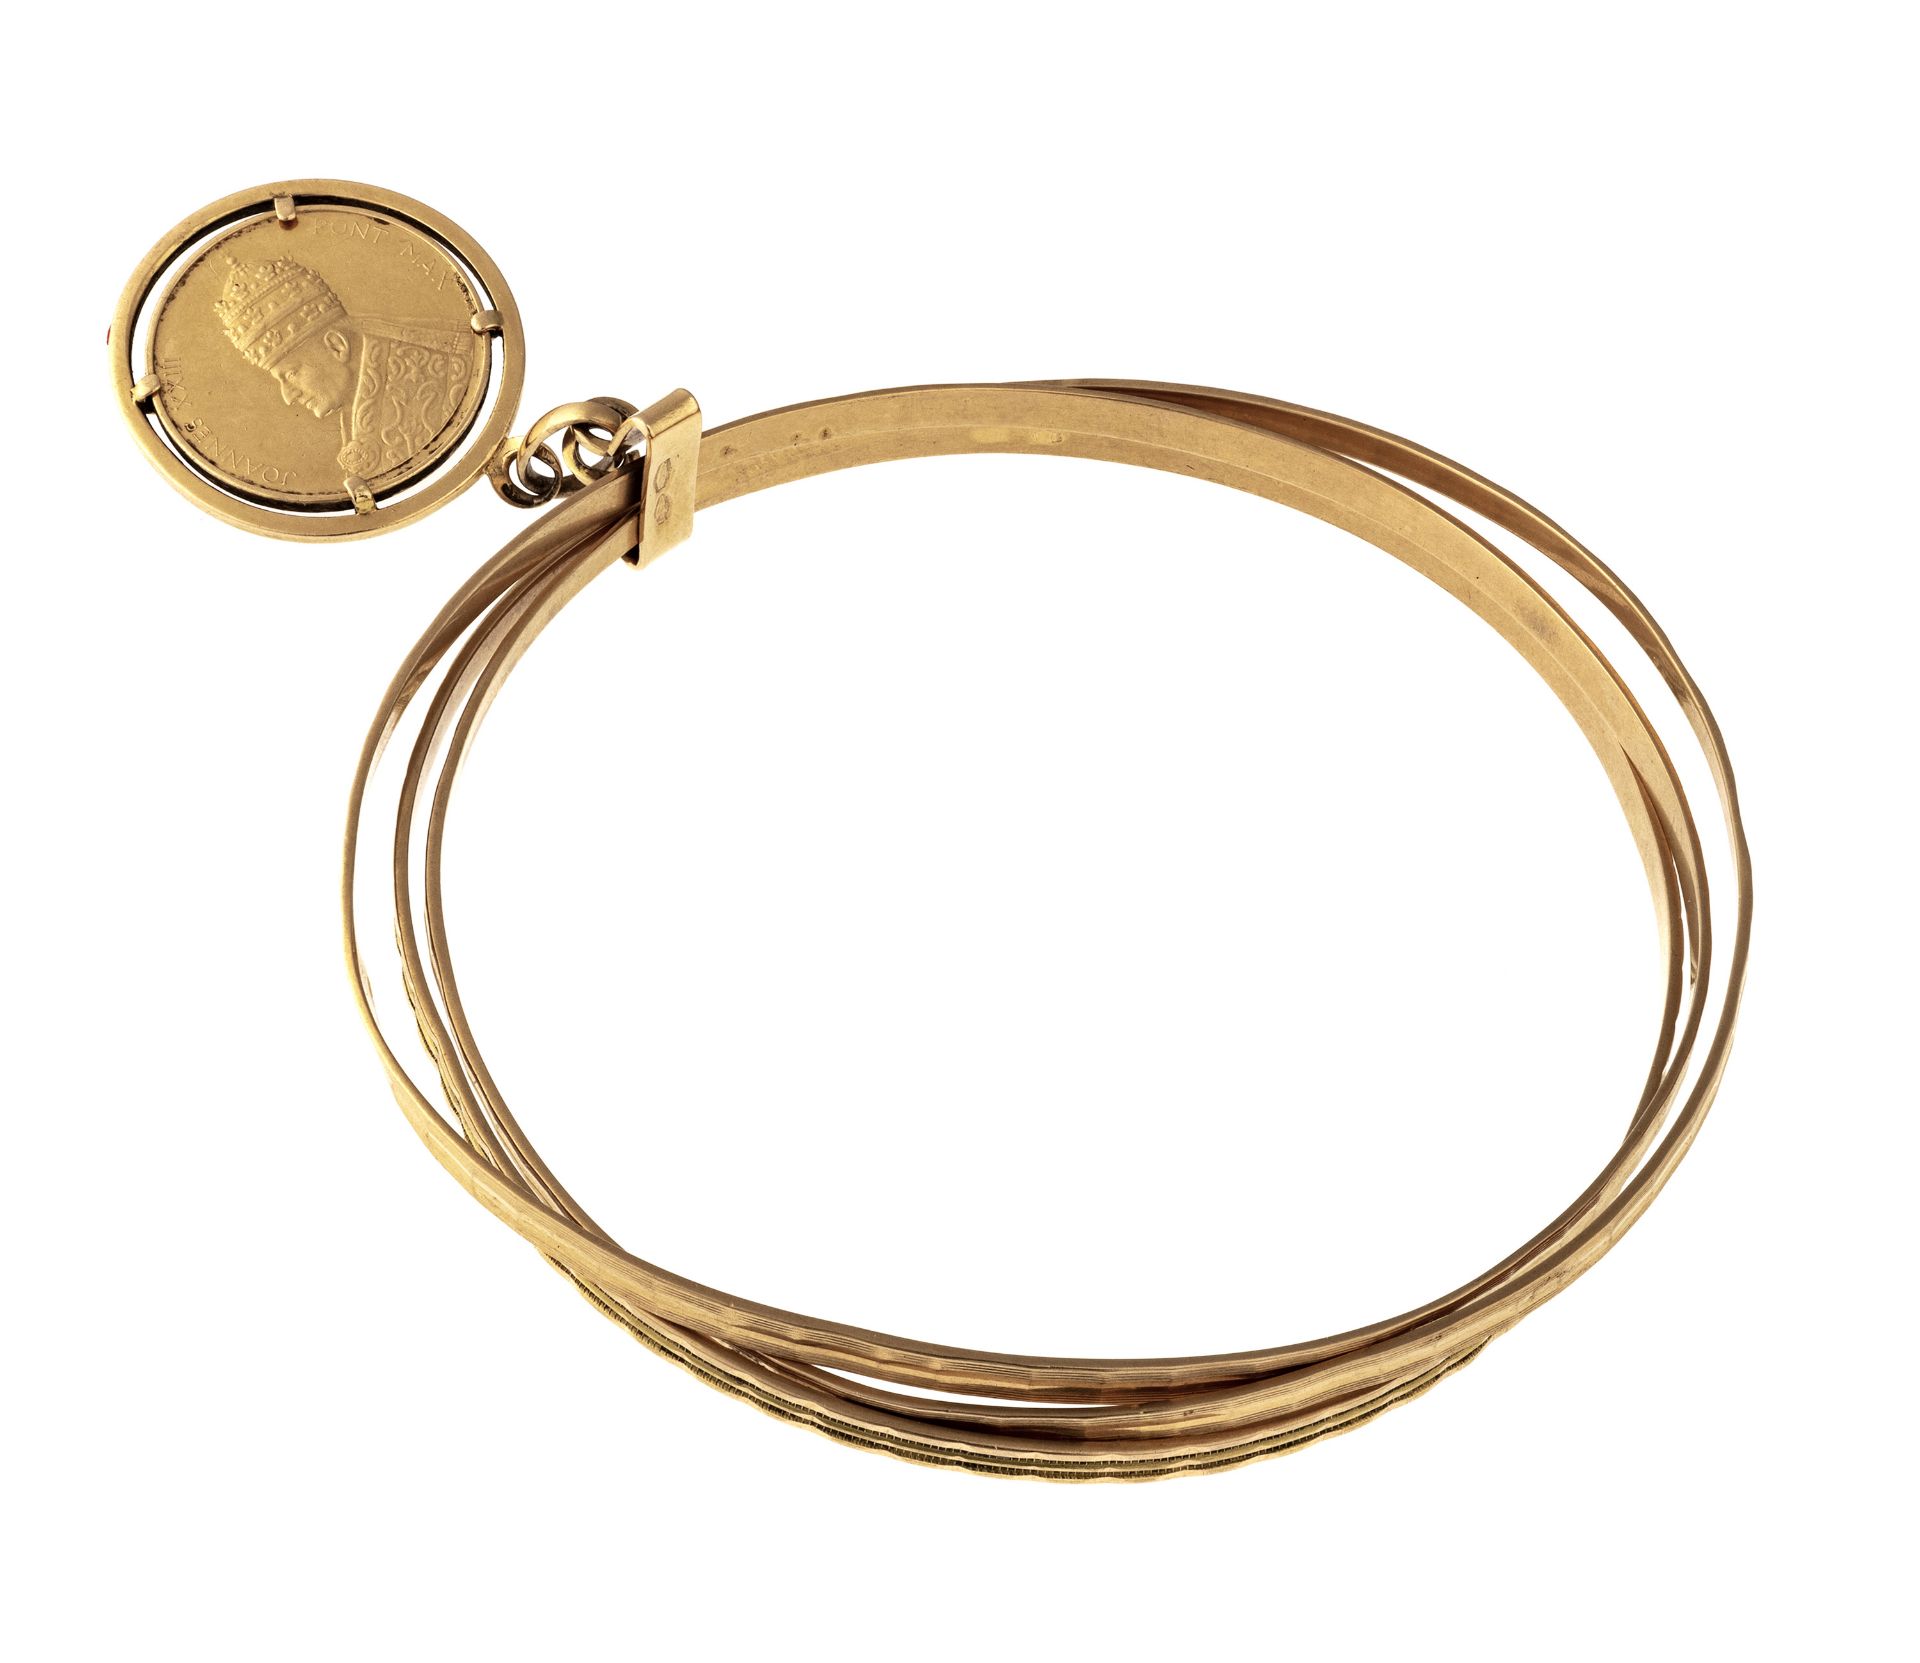 GOLD BRACELET WITH COIN